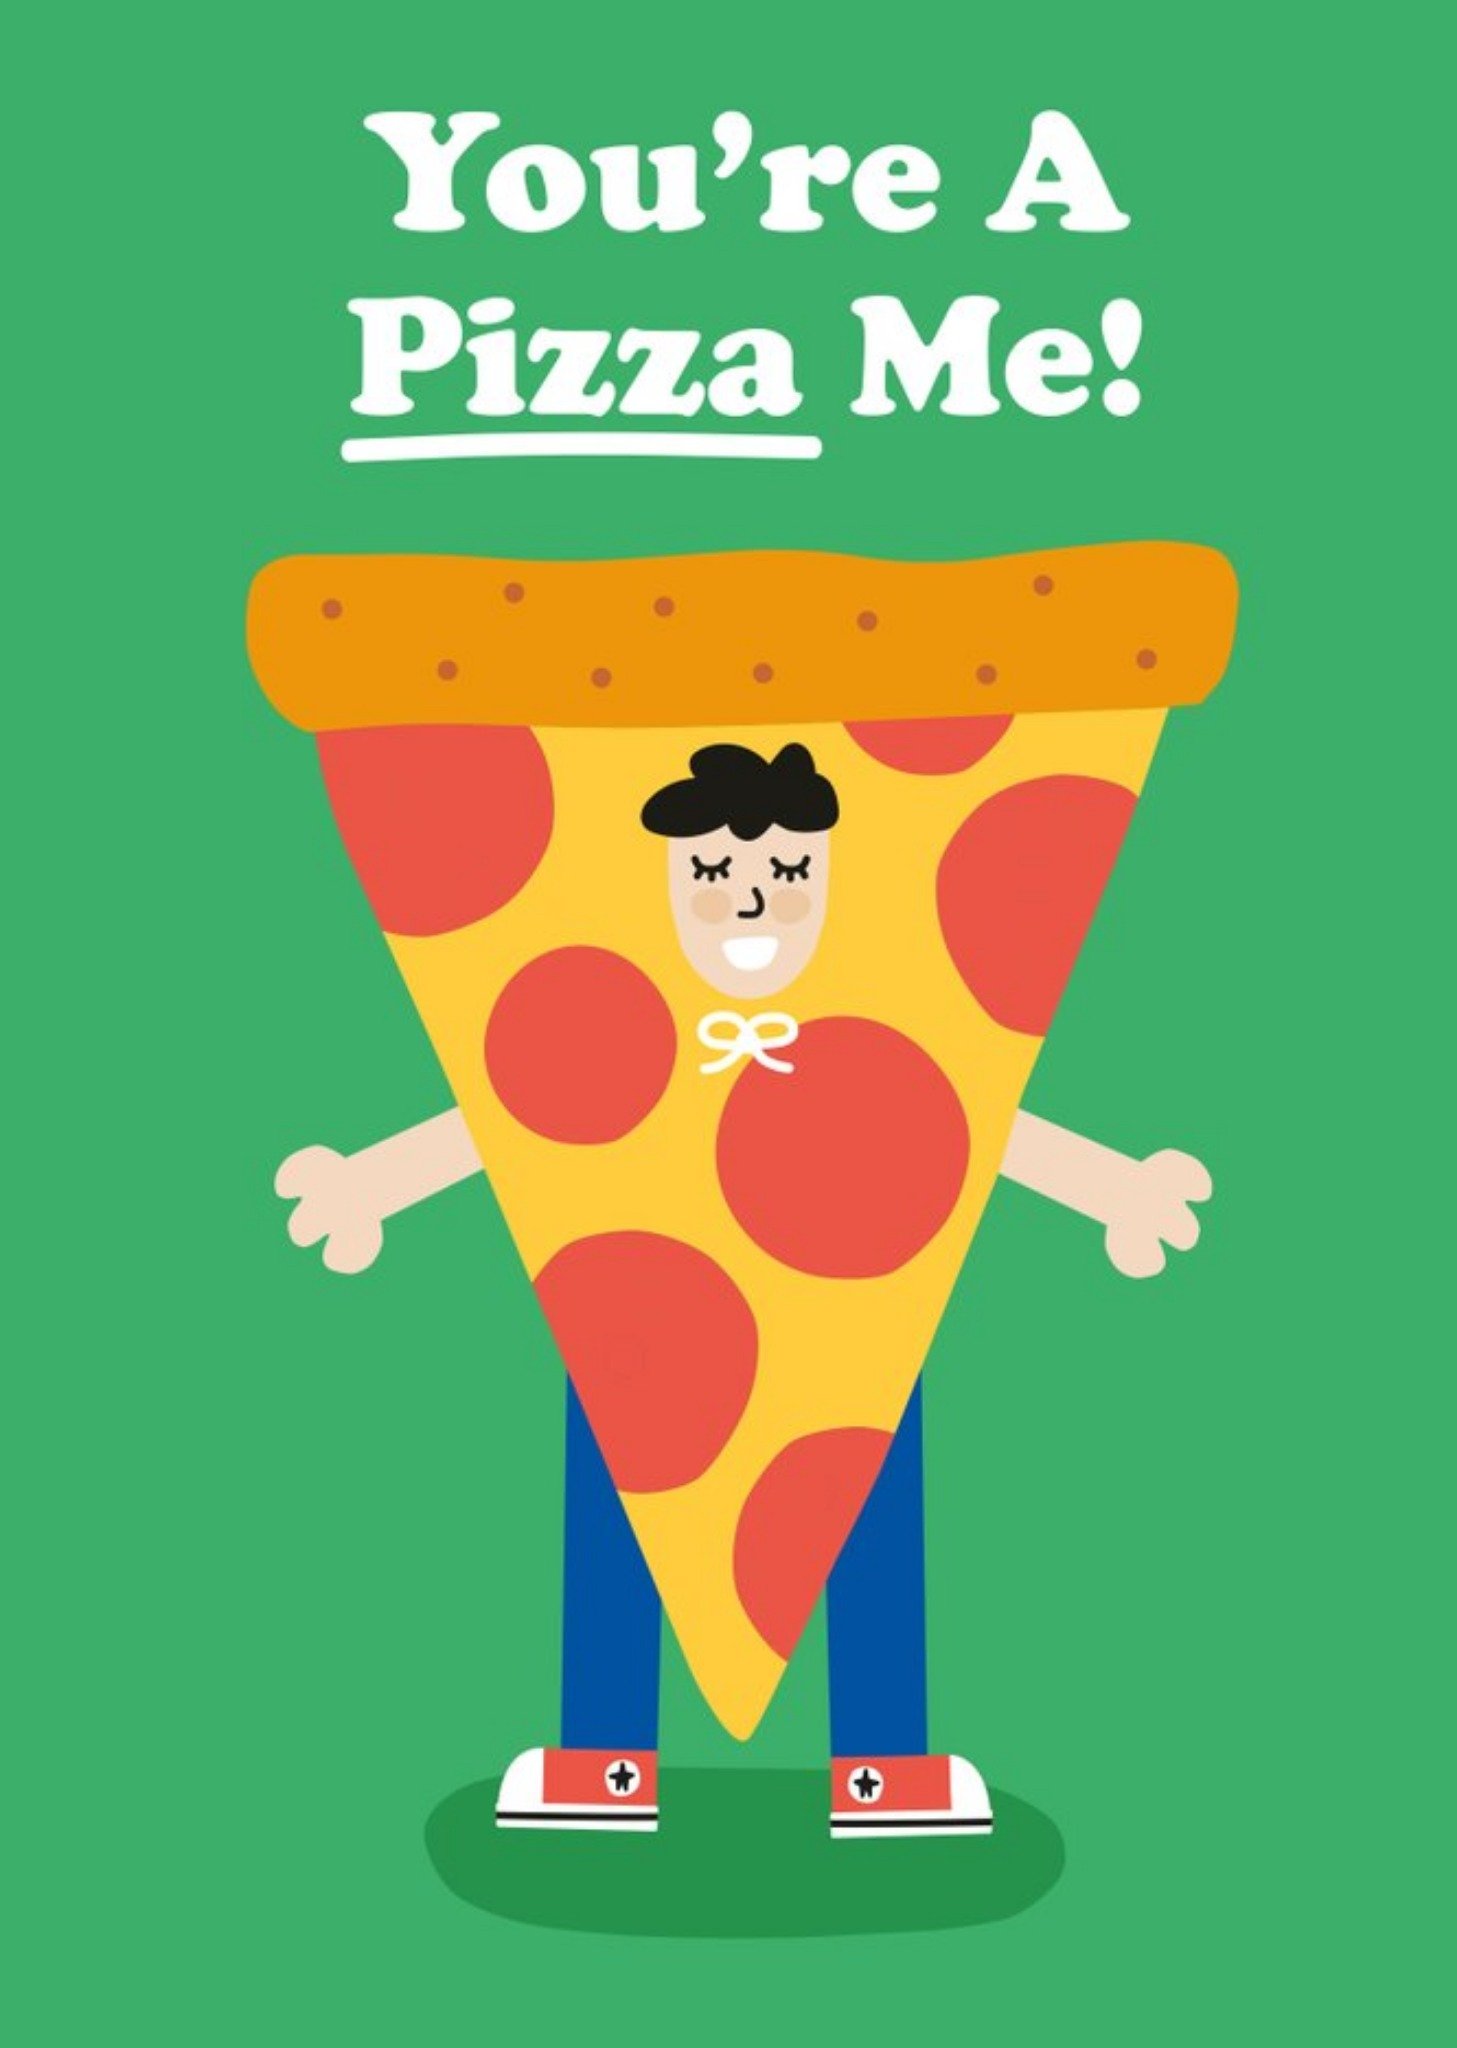 Moonpig Illustration Of A Person Wearing A Pizza Costume You're A Pizza Me Funny Pun Card, Large